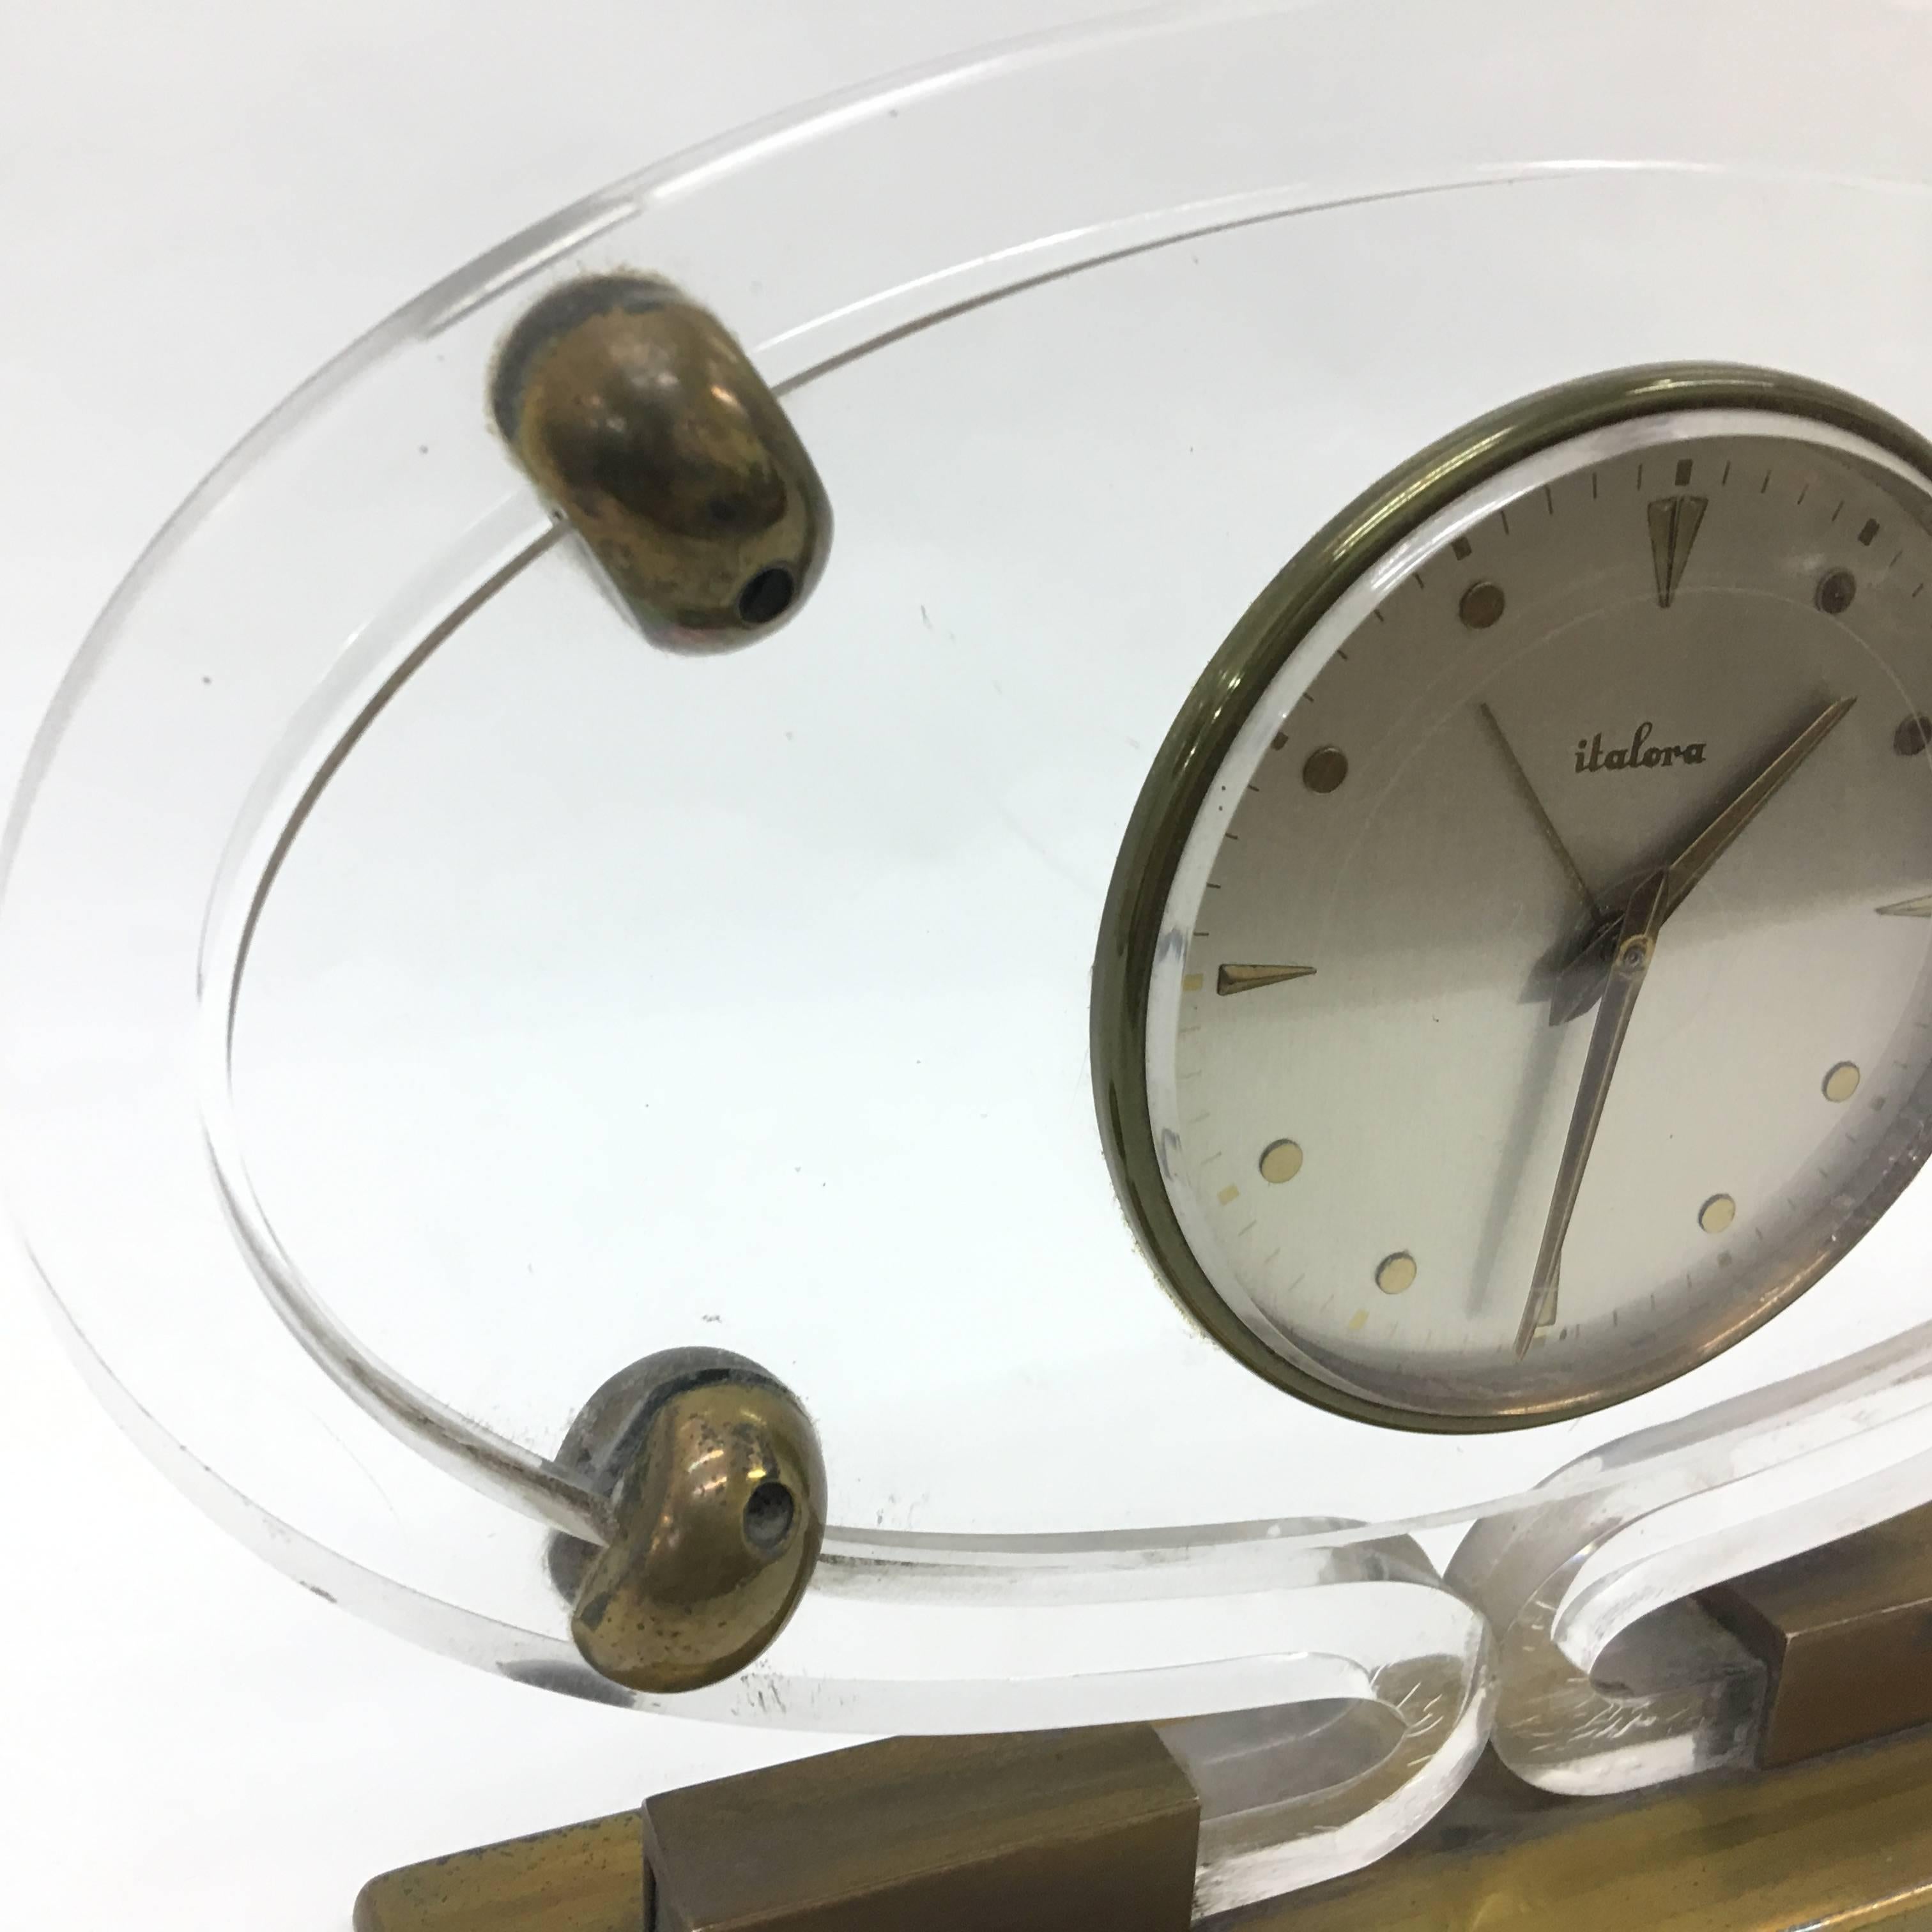 Stylish brass and plexiglass table clock made in Italy in 1950s by Italora, good conditions overall.